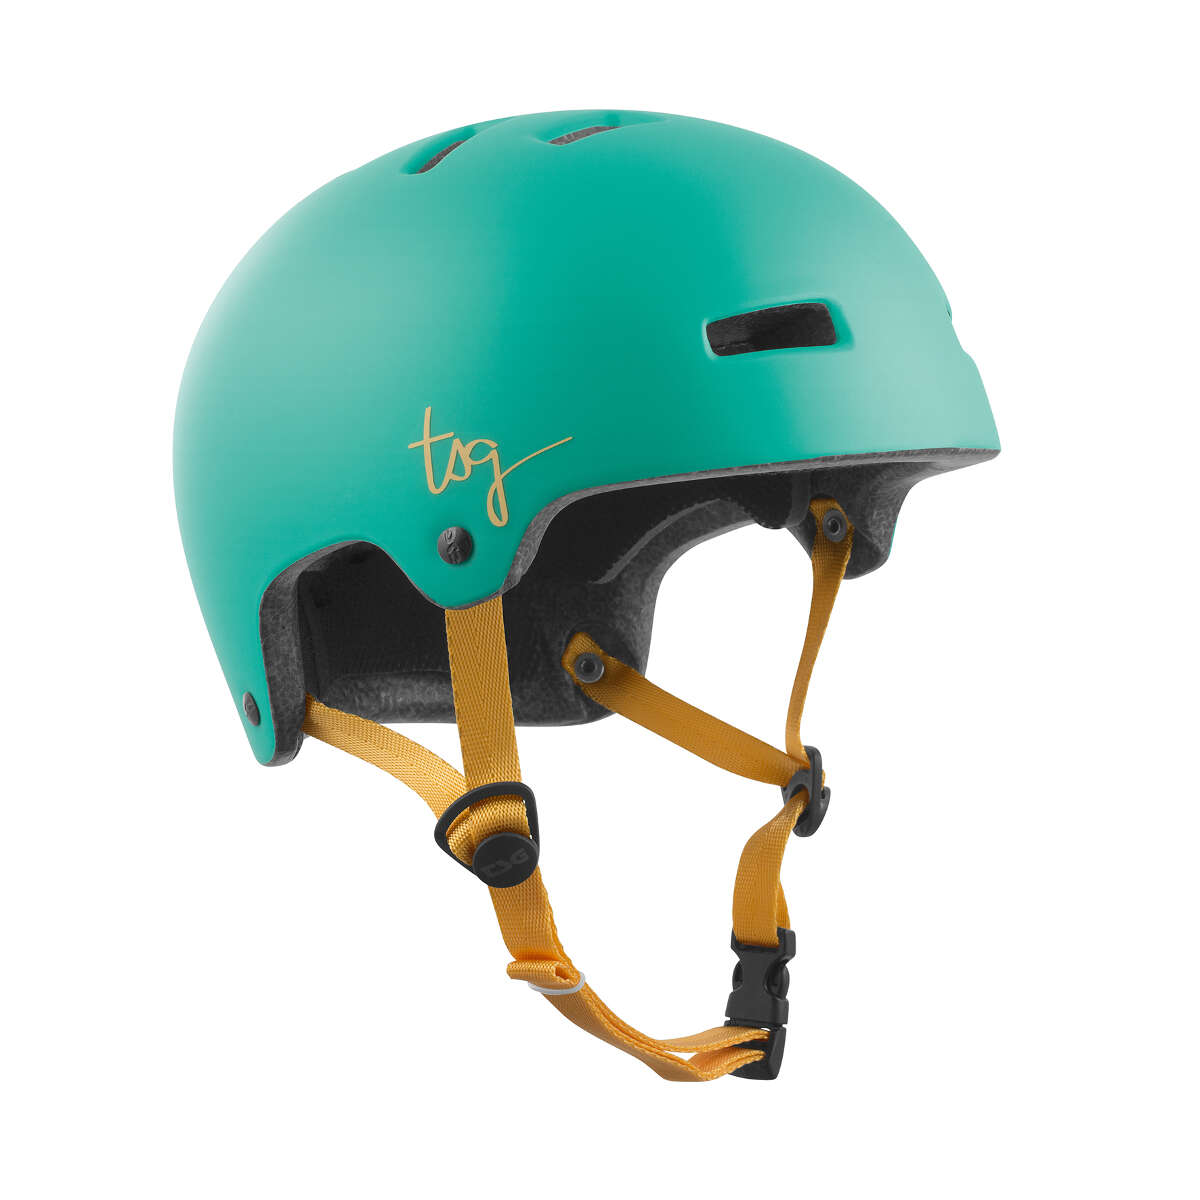 TSG Girls BMX/Dirt Helm Ivy Solid Color - Satin Jade Turquoise